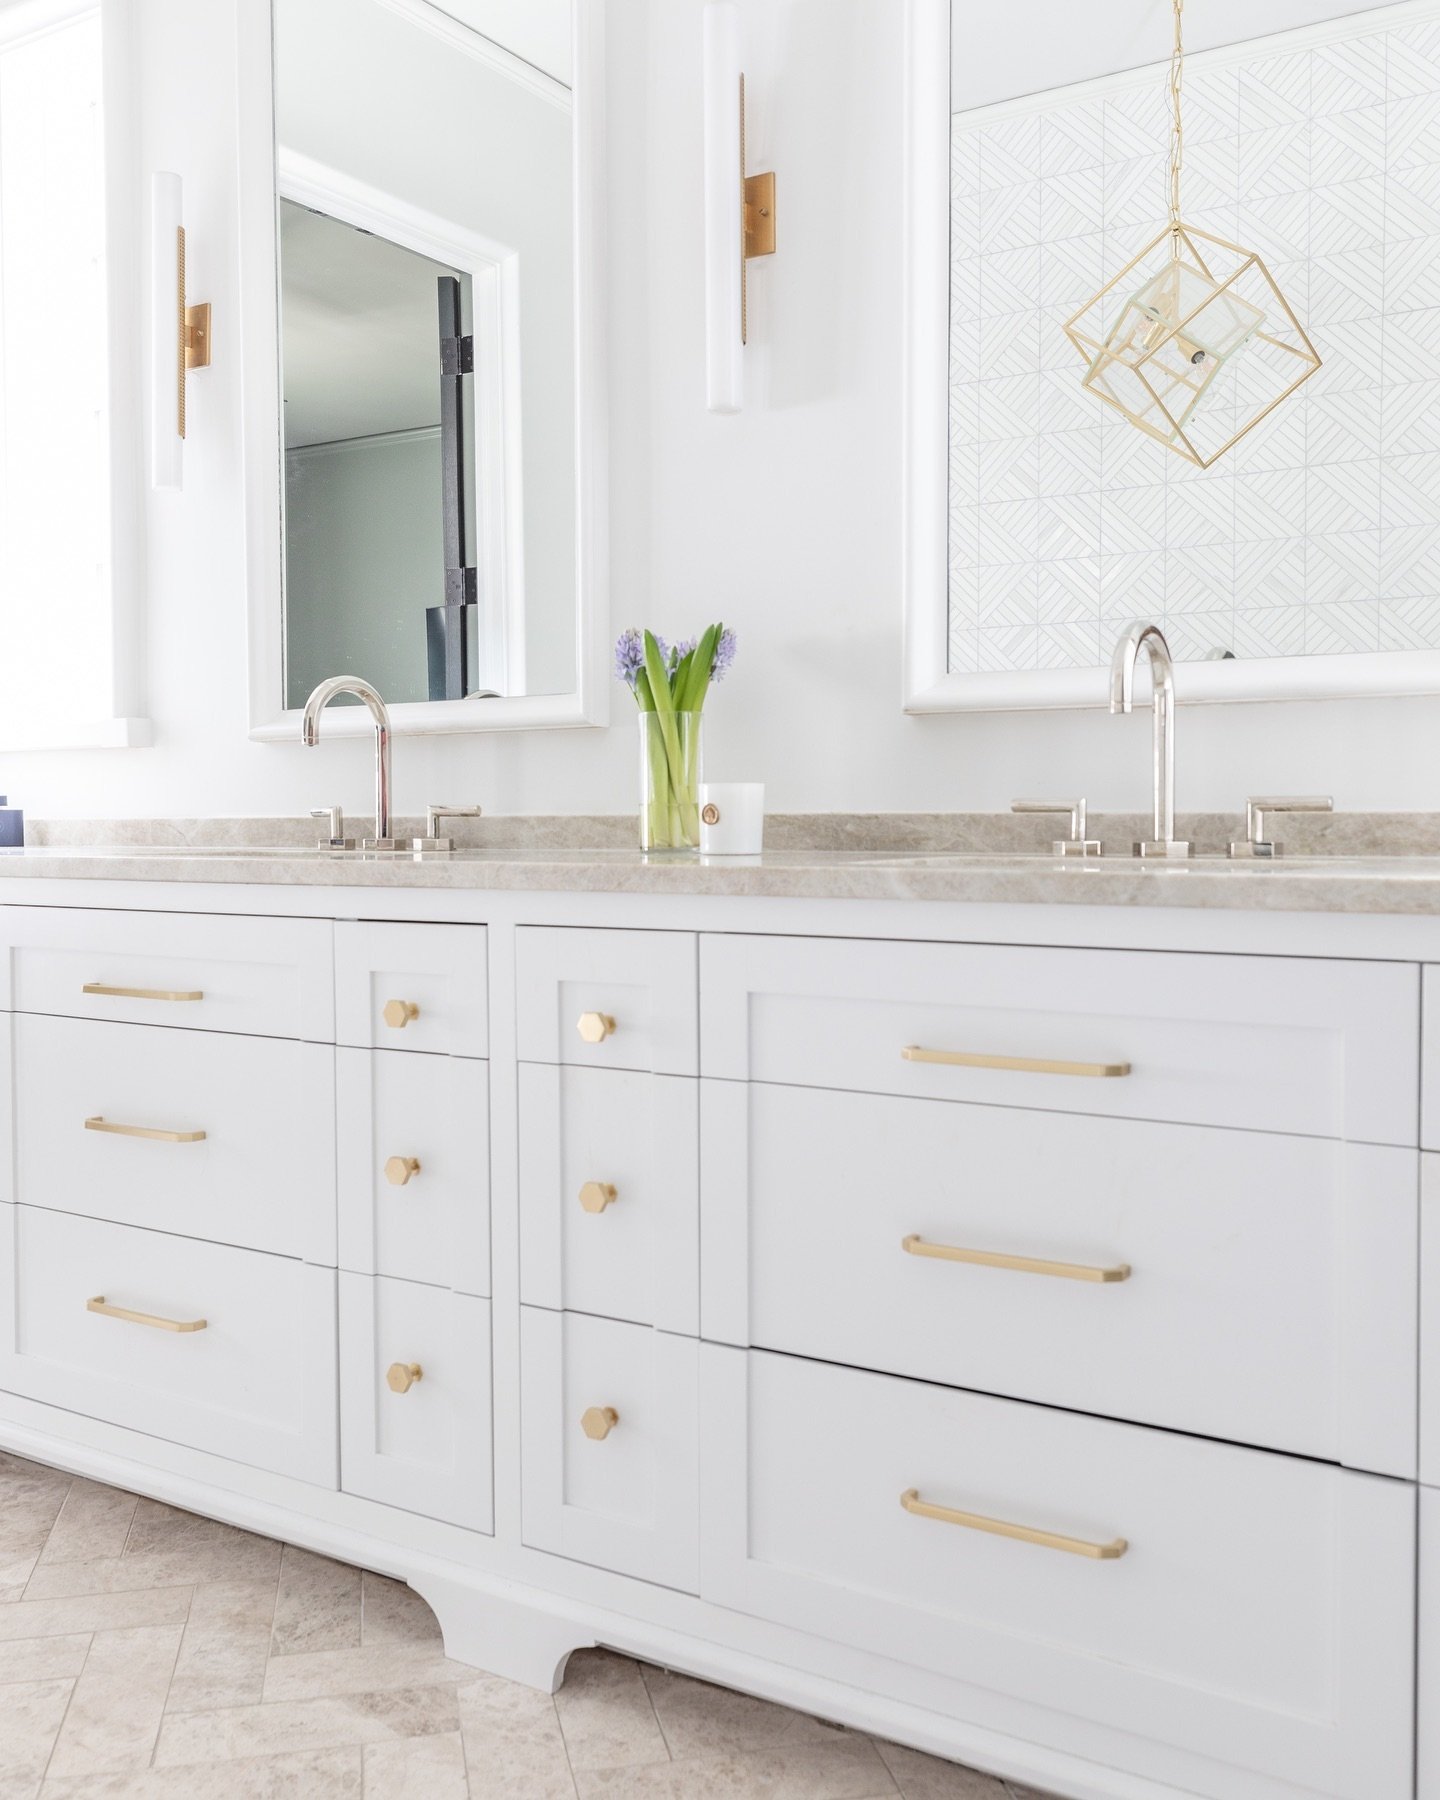 So many gorgeous details to swoon over in this primary bathroom! The clean lines, stunning countertops, and tile texture makes for such an elegant space. 🛁

#shoppeayer #ashleyayerinteriors